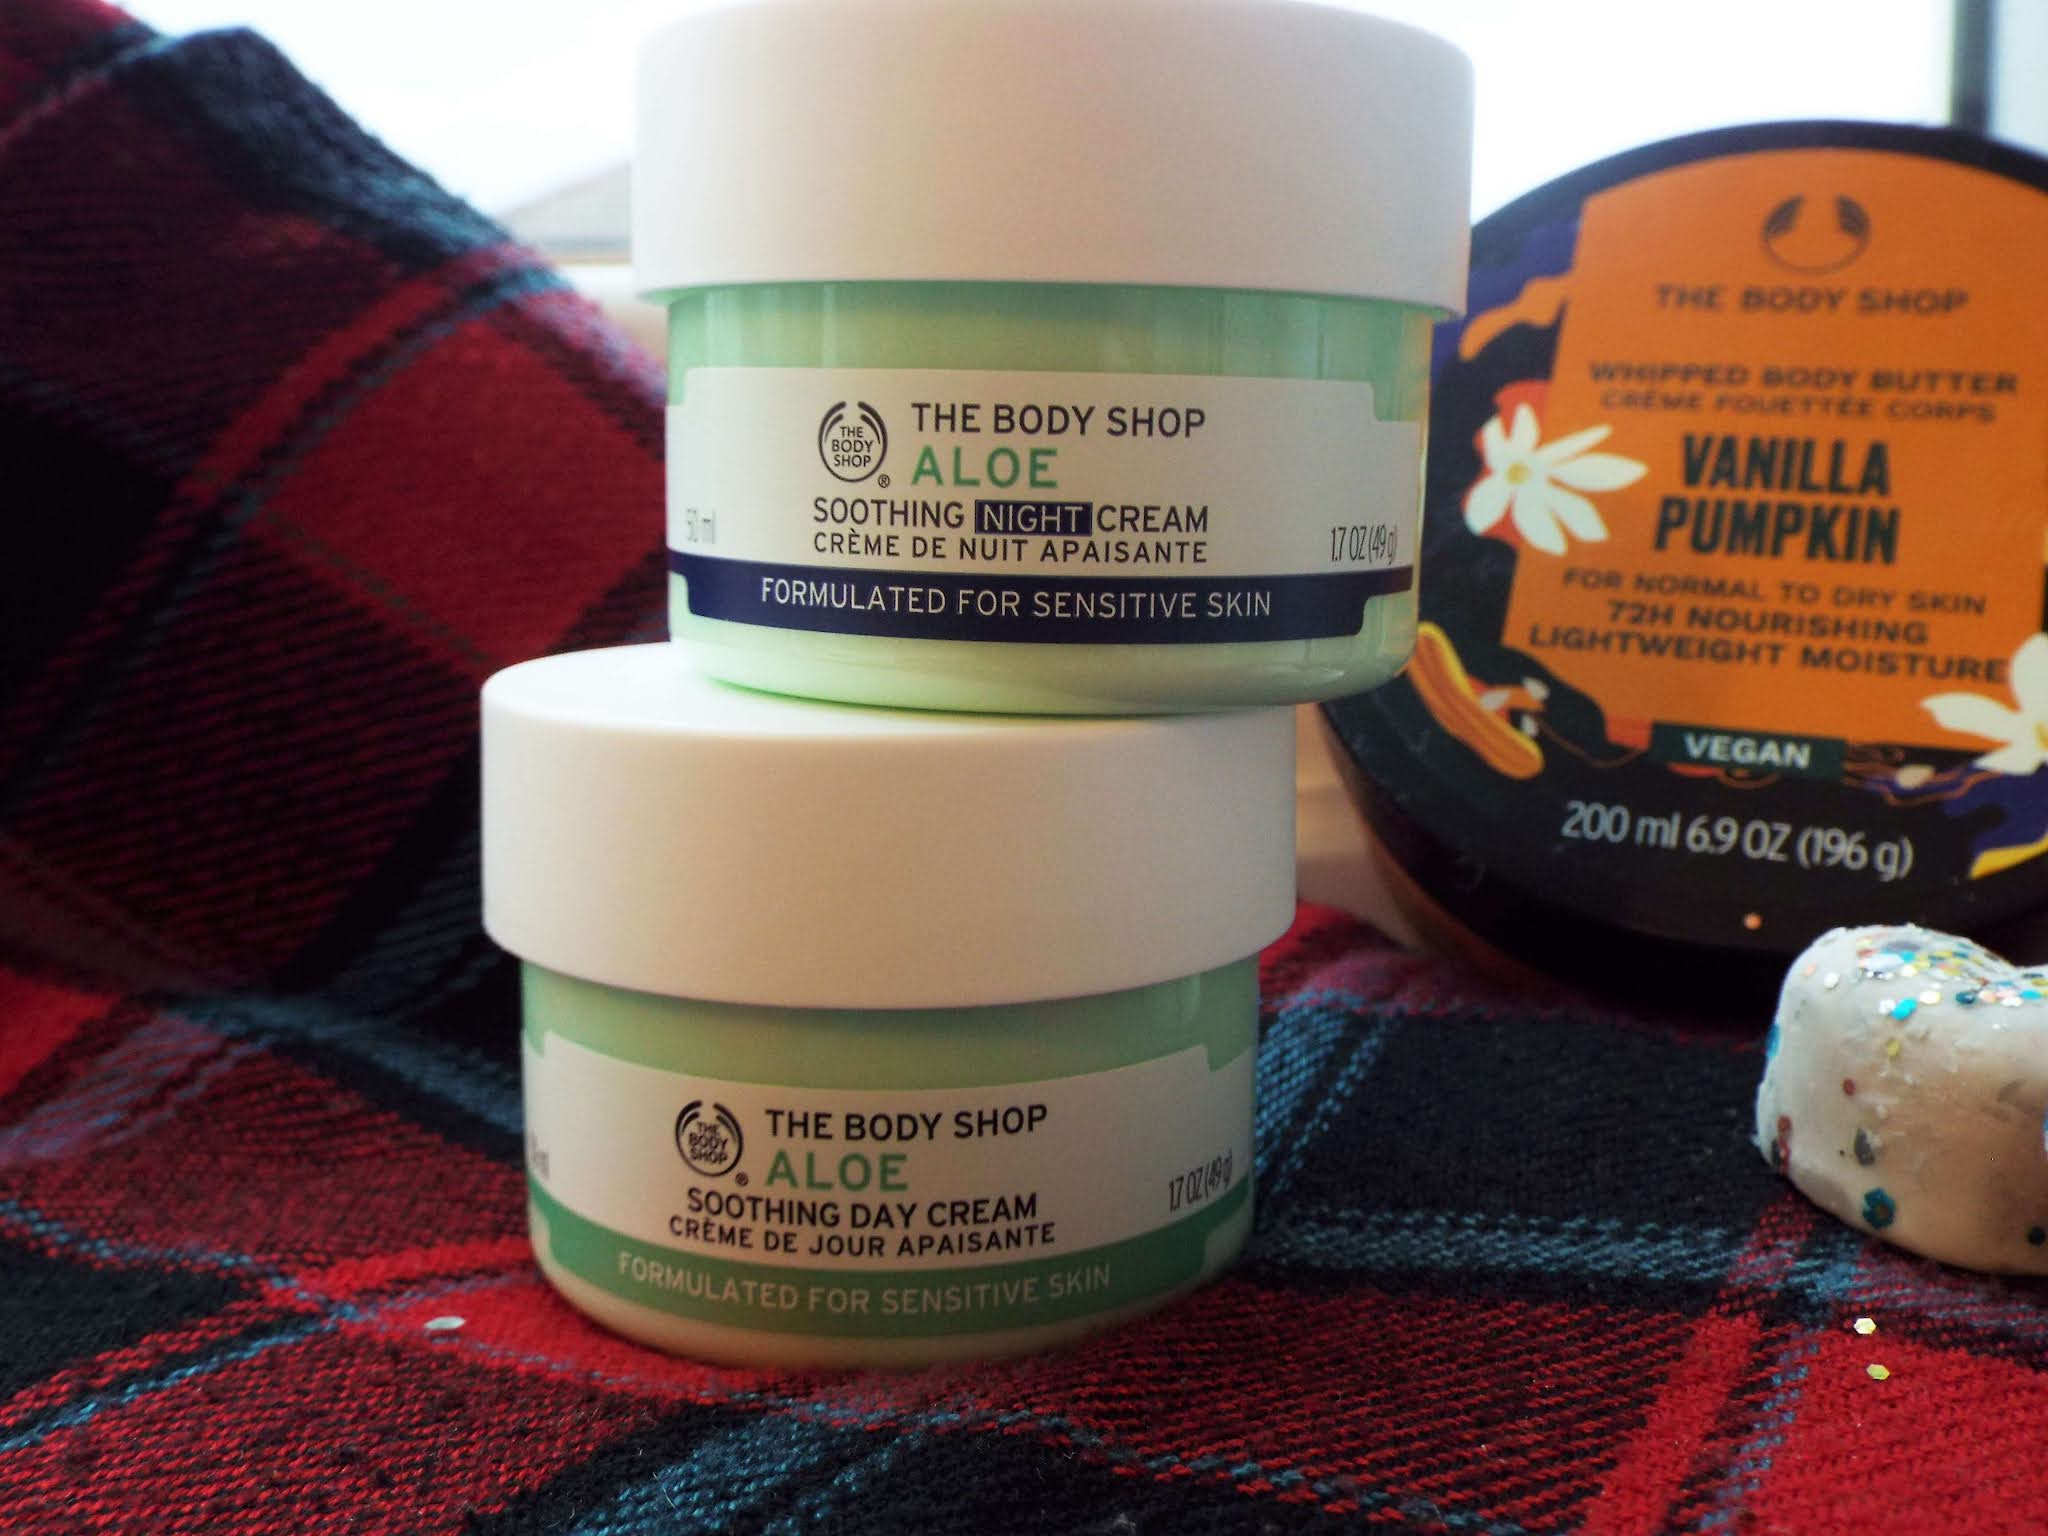 The Body Shop Soothing Aloe Night and Day Cream, sat on top of each other in green tubs, on tartan scarf.